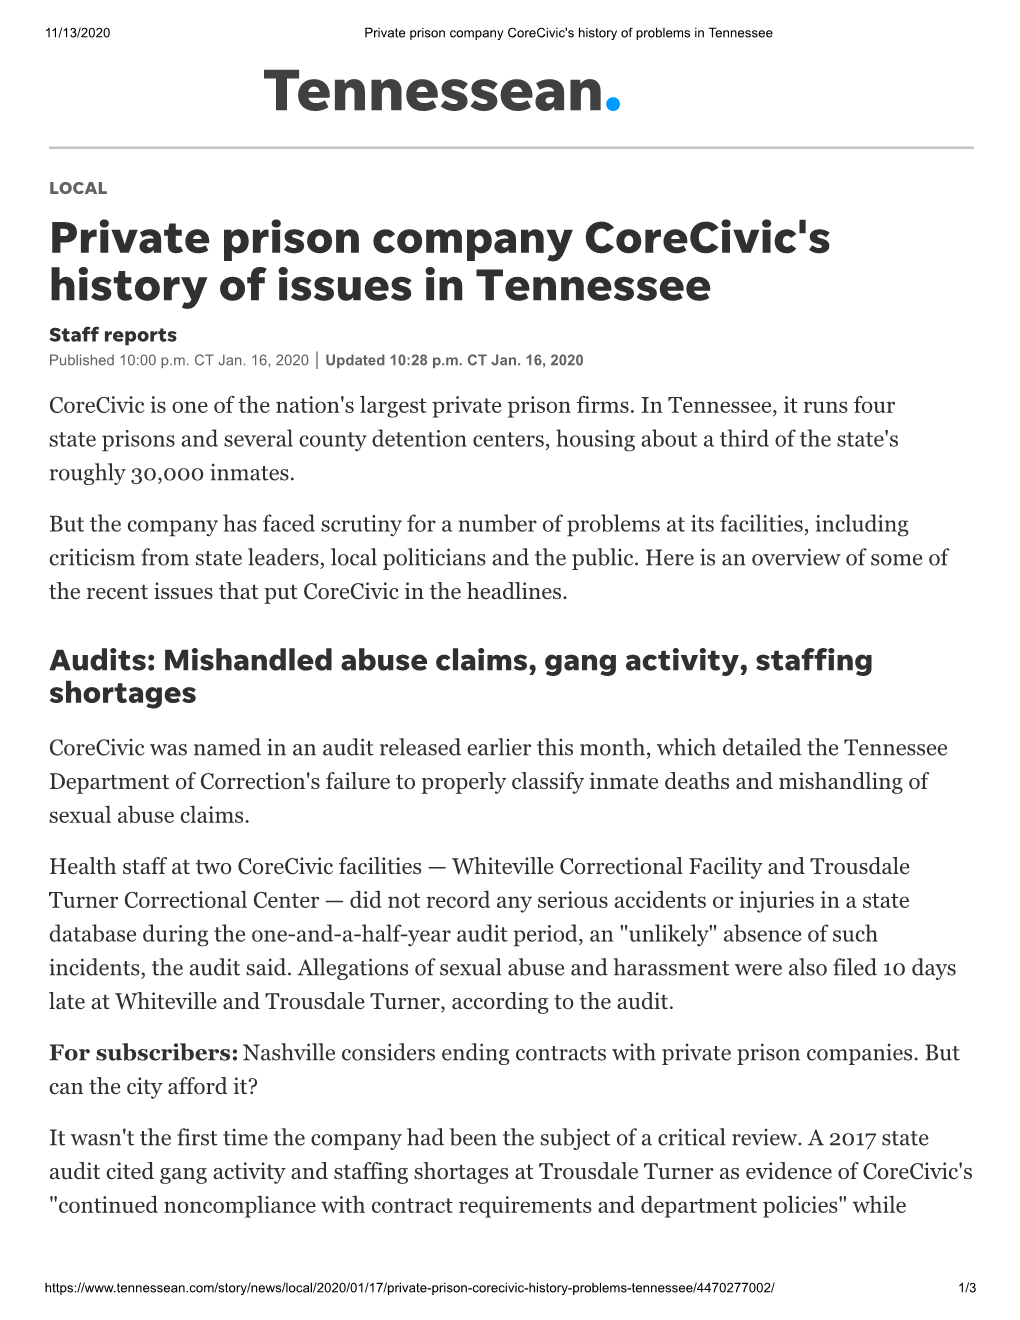 Private Prison Company Corecivic's History of Issues in Tennessee Staff Reports Published 10:00 P.M